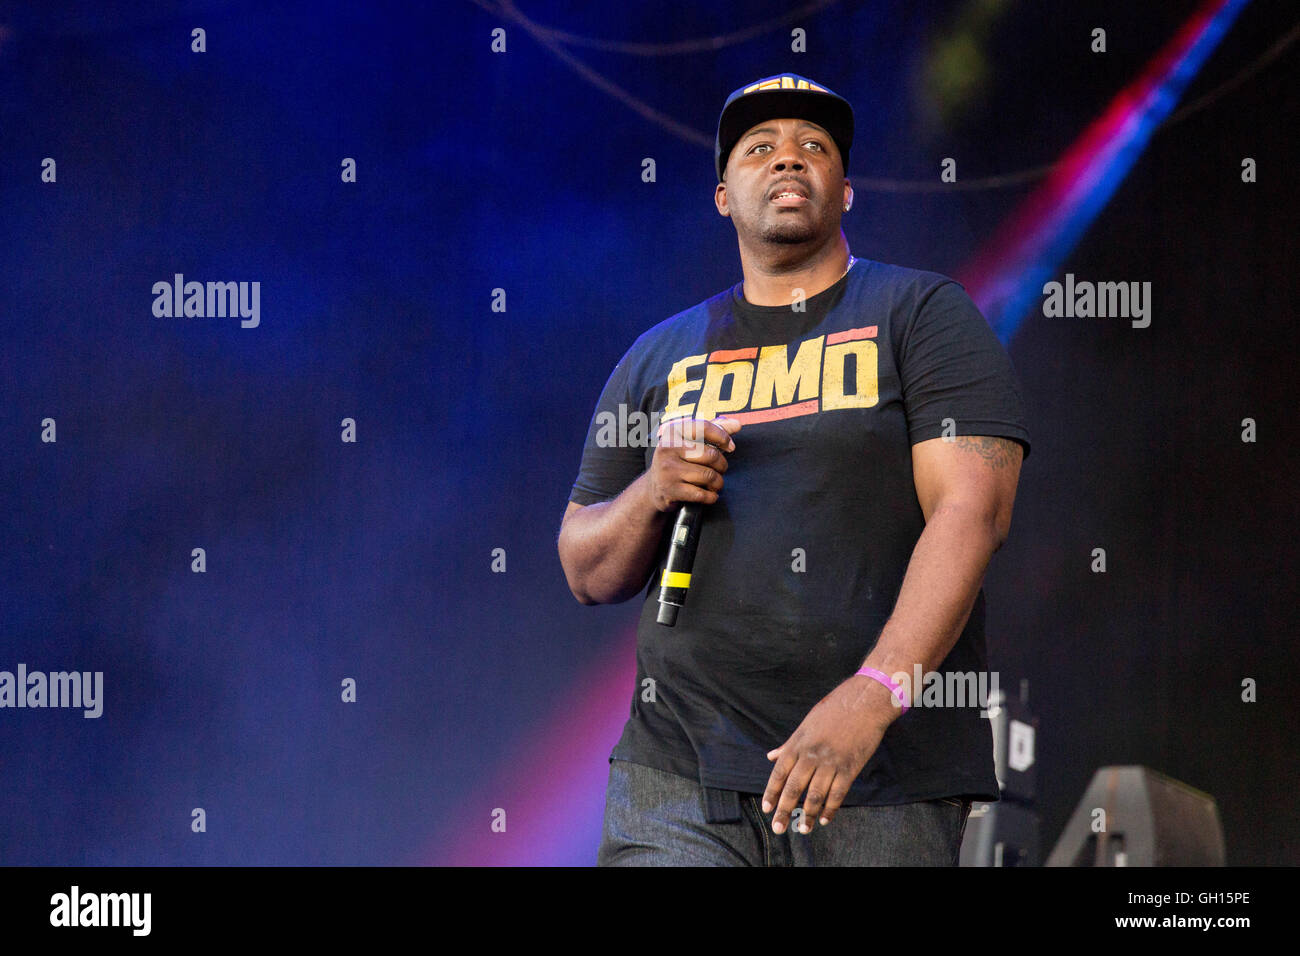 Tinley Park, Illinois, USA. 5th Aug, 2016. ERICK SERMON of EPMD performs live at Hollywood Casino Amphitheater during the Art of Rap Festival in Tinley Park, Illinois © Daniel DeSlover/ZUMA Wire/Alamy Live News Stock Photo